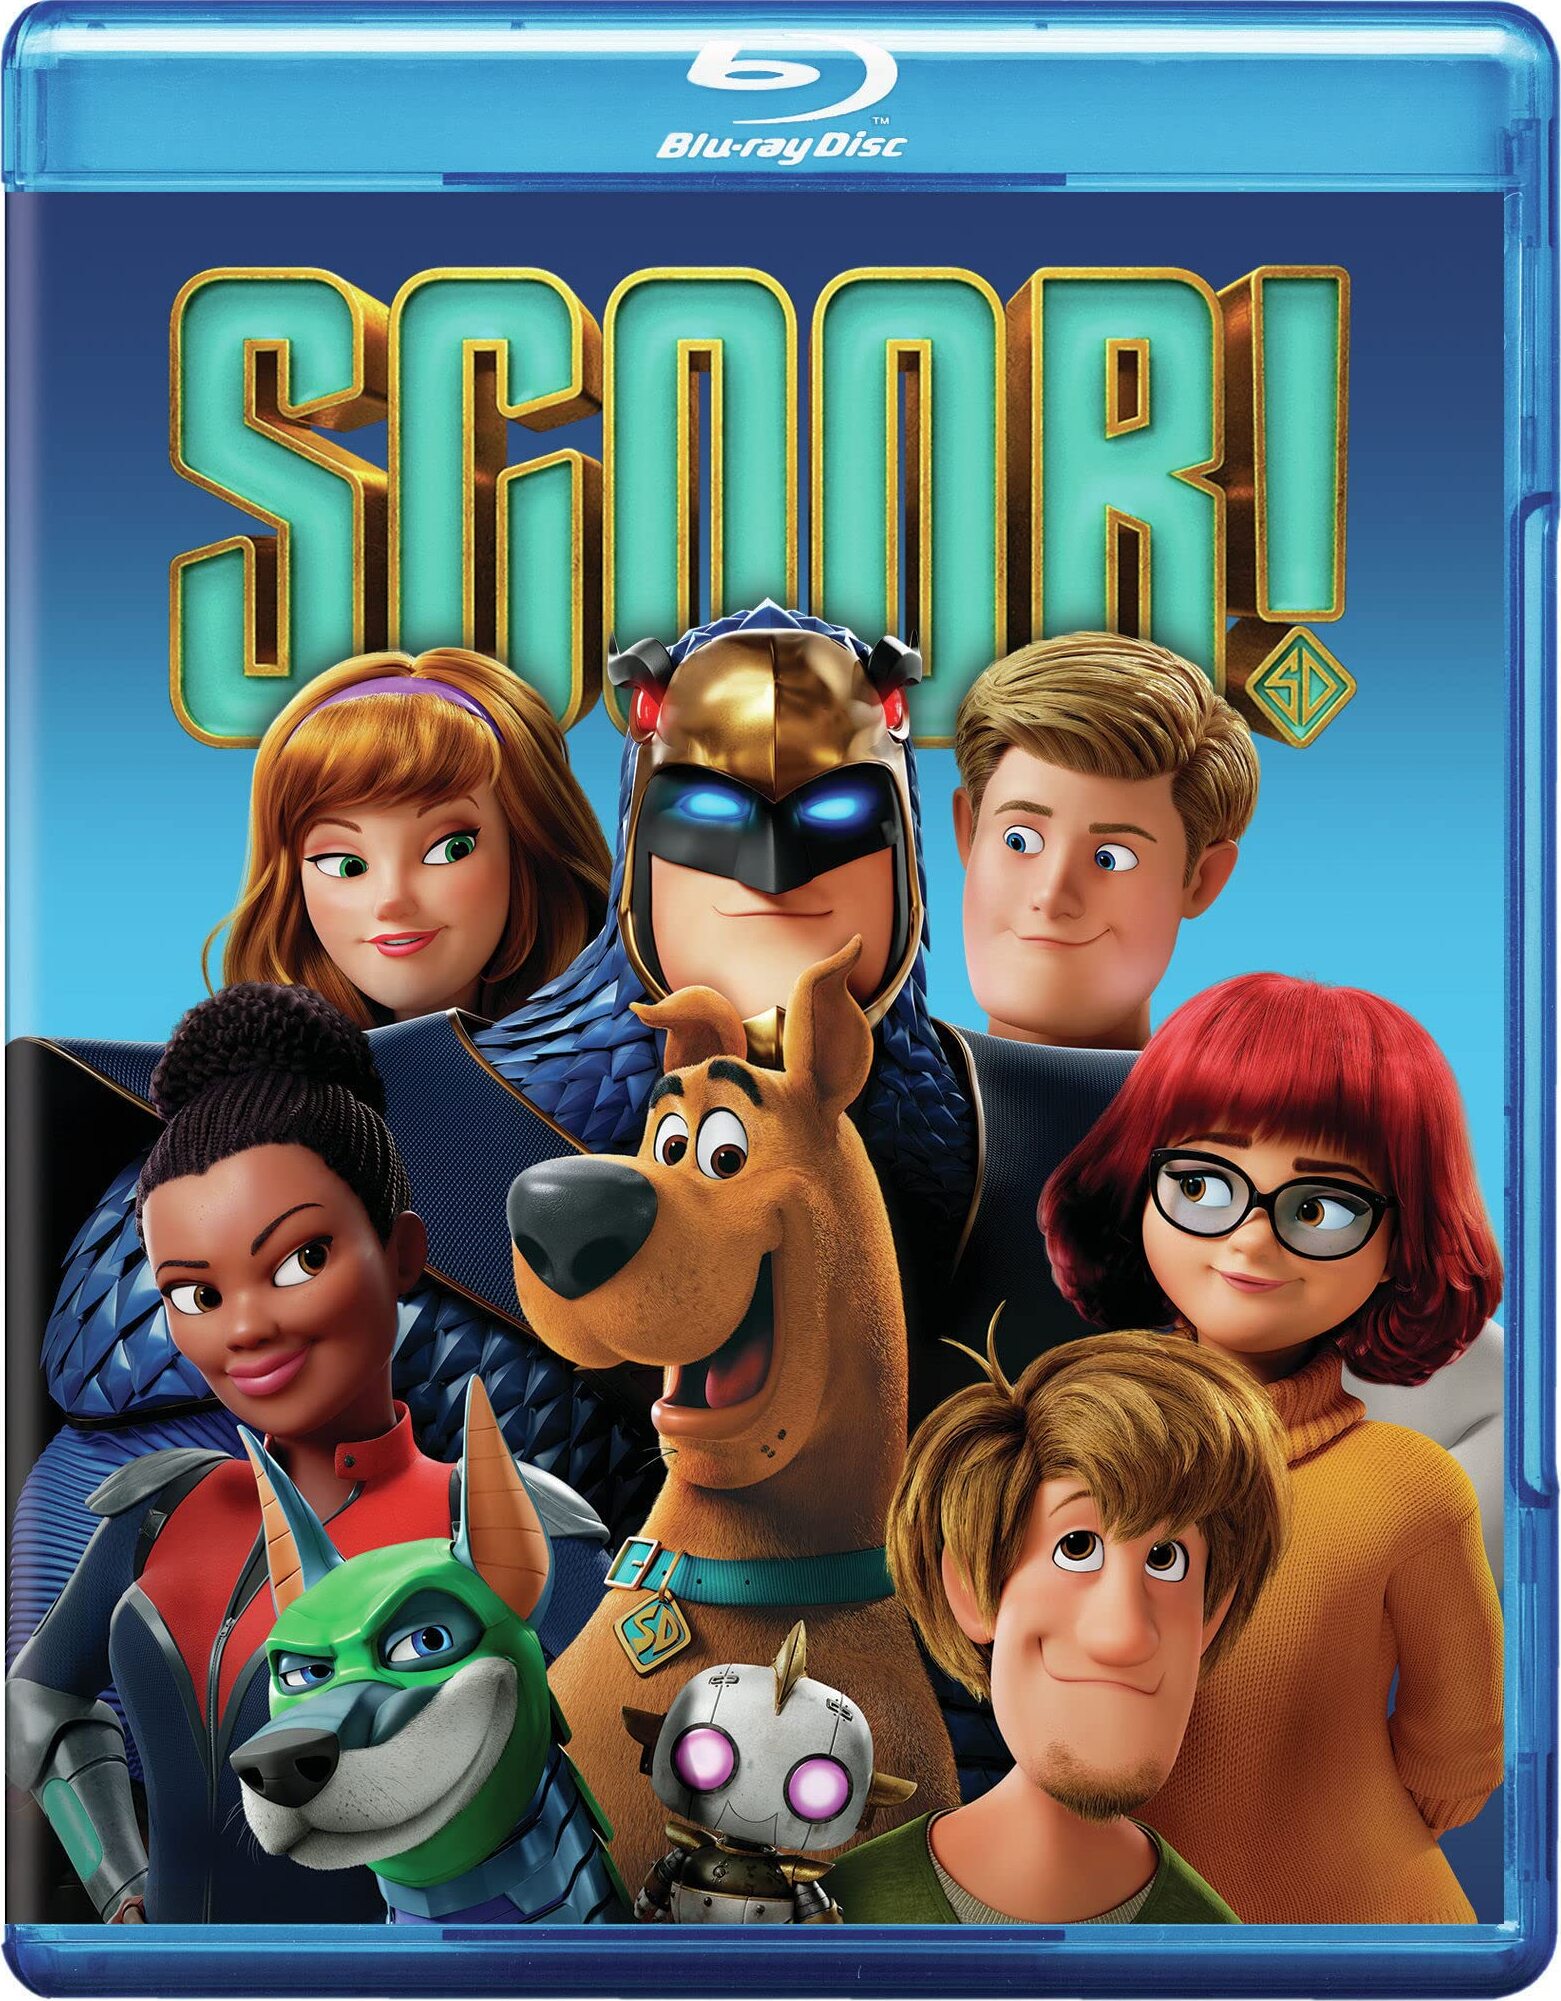 Scoob! (2020) ¡Scooby! (2020) [AC3 5.1 + SUP] [Blu Ray-Rip]  257586_front